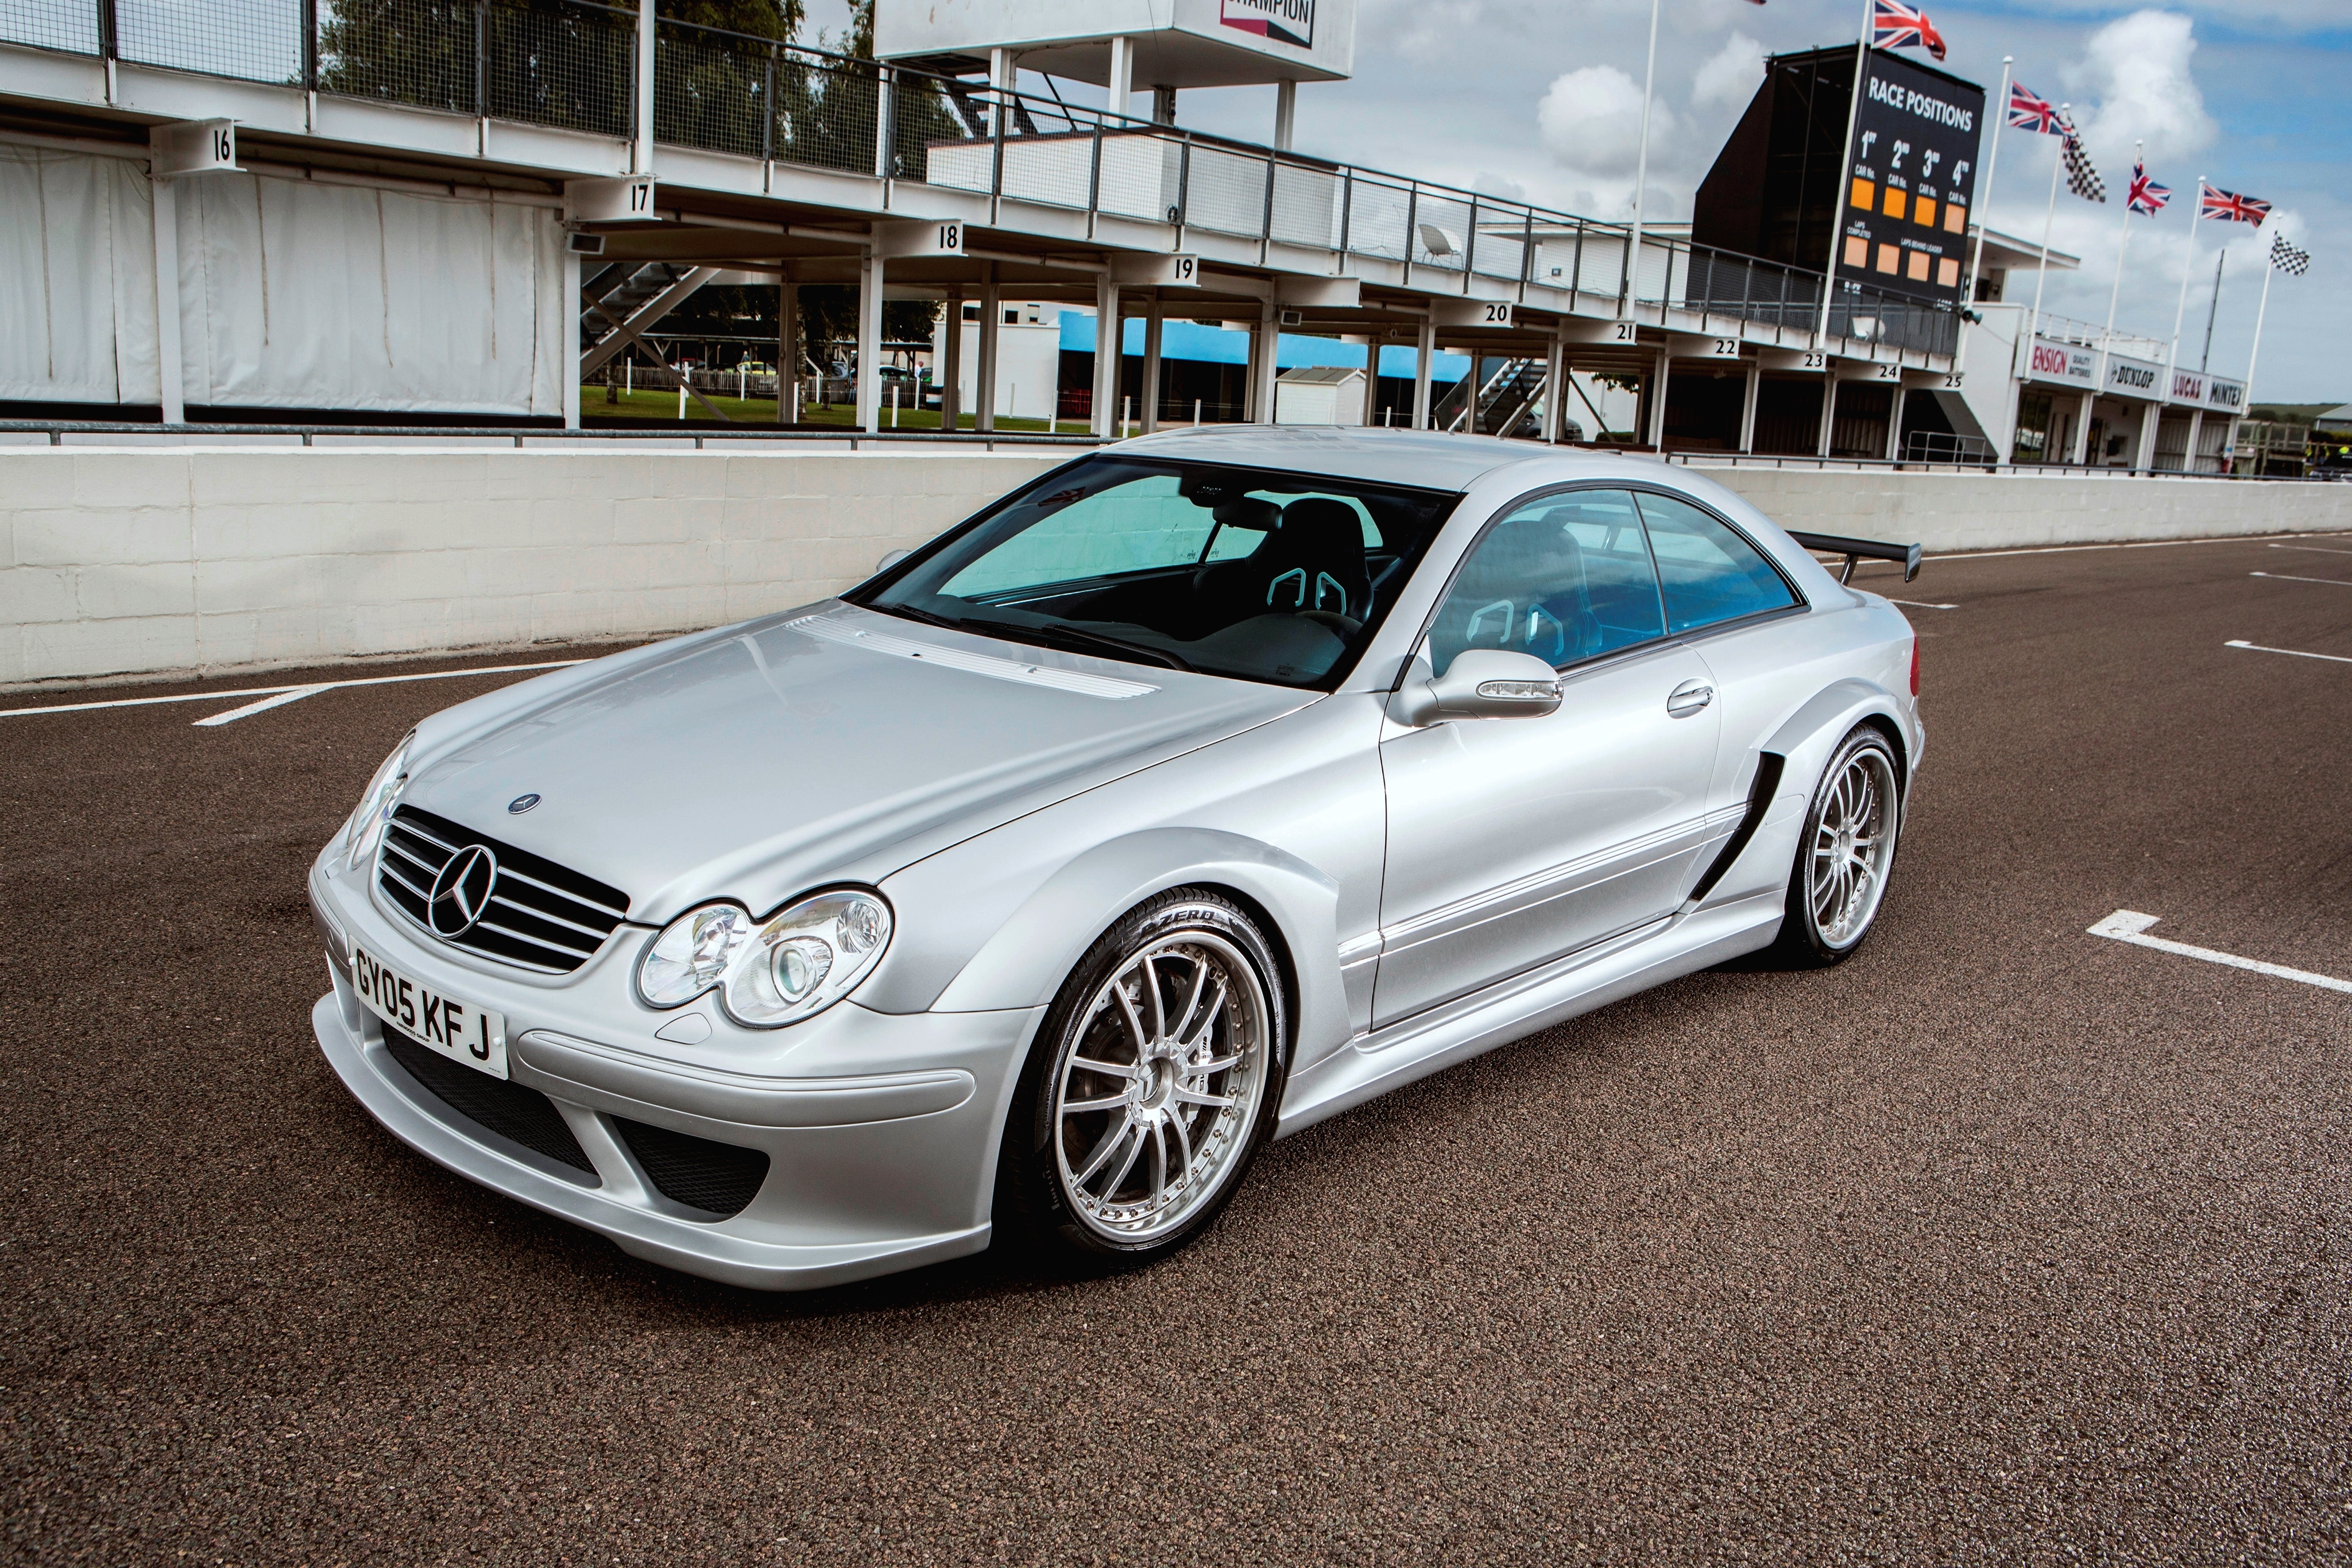 cars, side view, amg, mercedes benz, silver, silvery, clk class